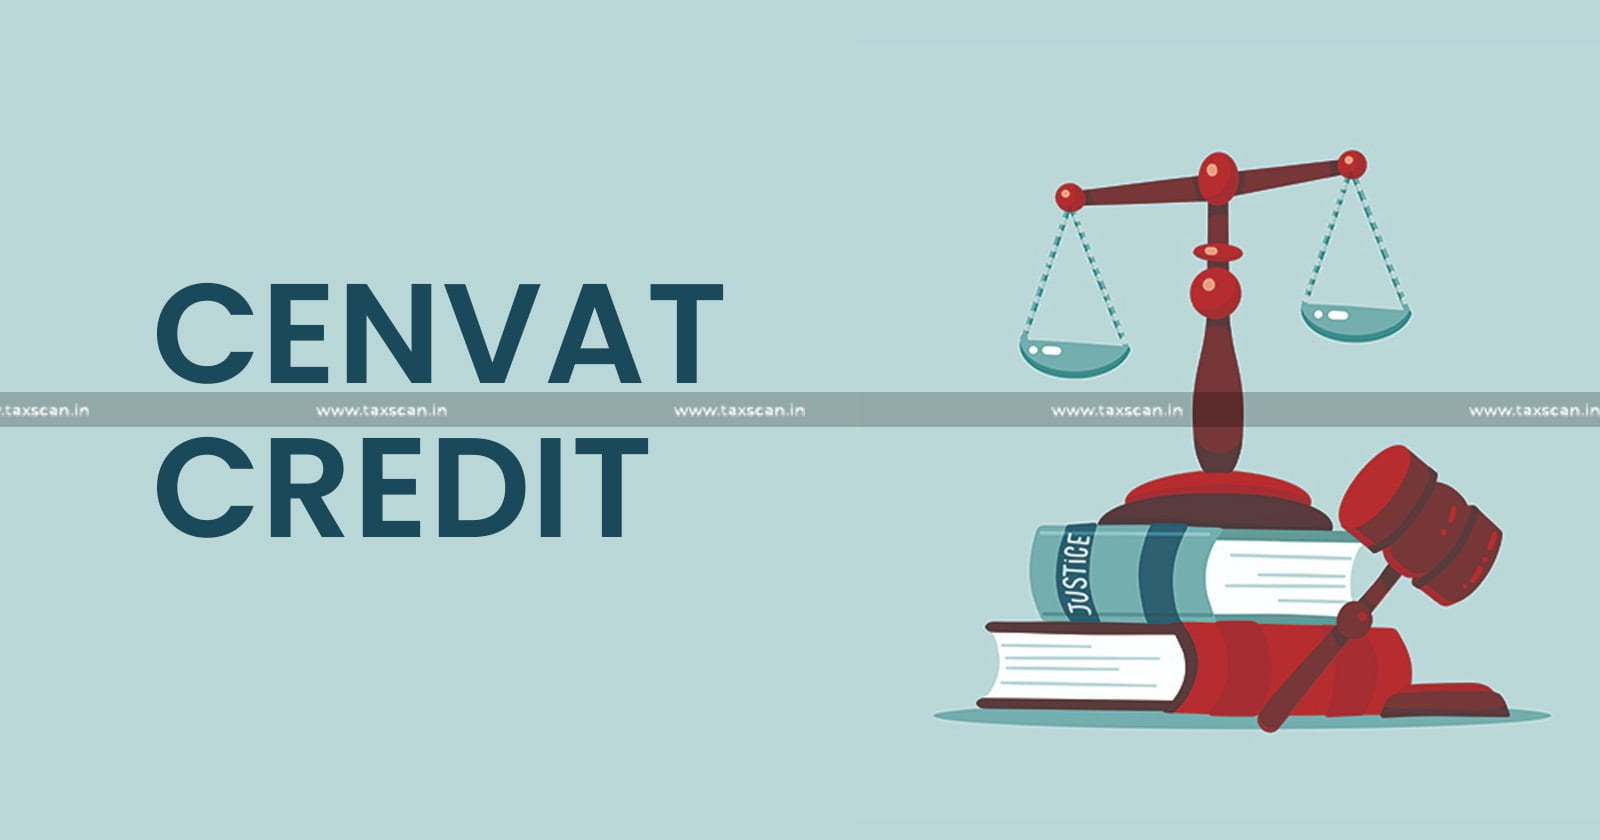 Cenvat Credit allowable on Input Services for providing Works Contract Service - CESTAT - Service Tax Demand - TAXSCAN